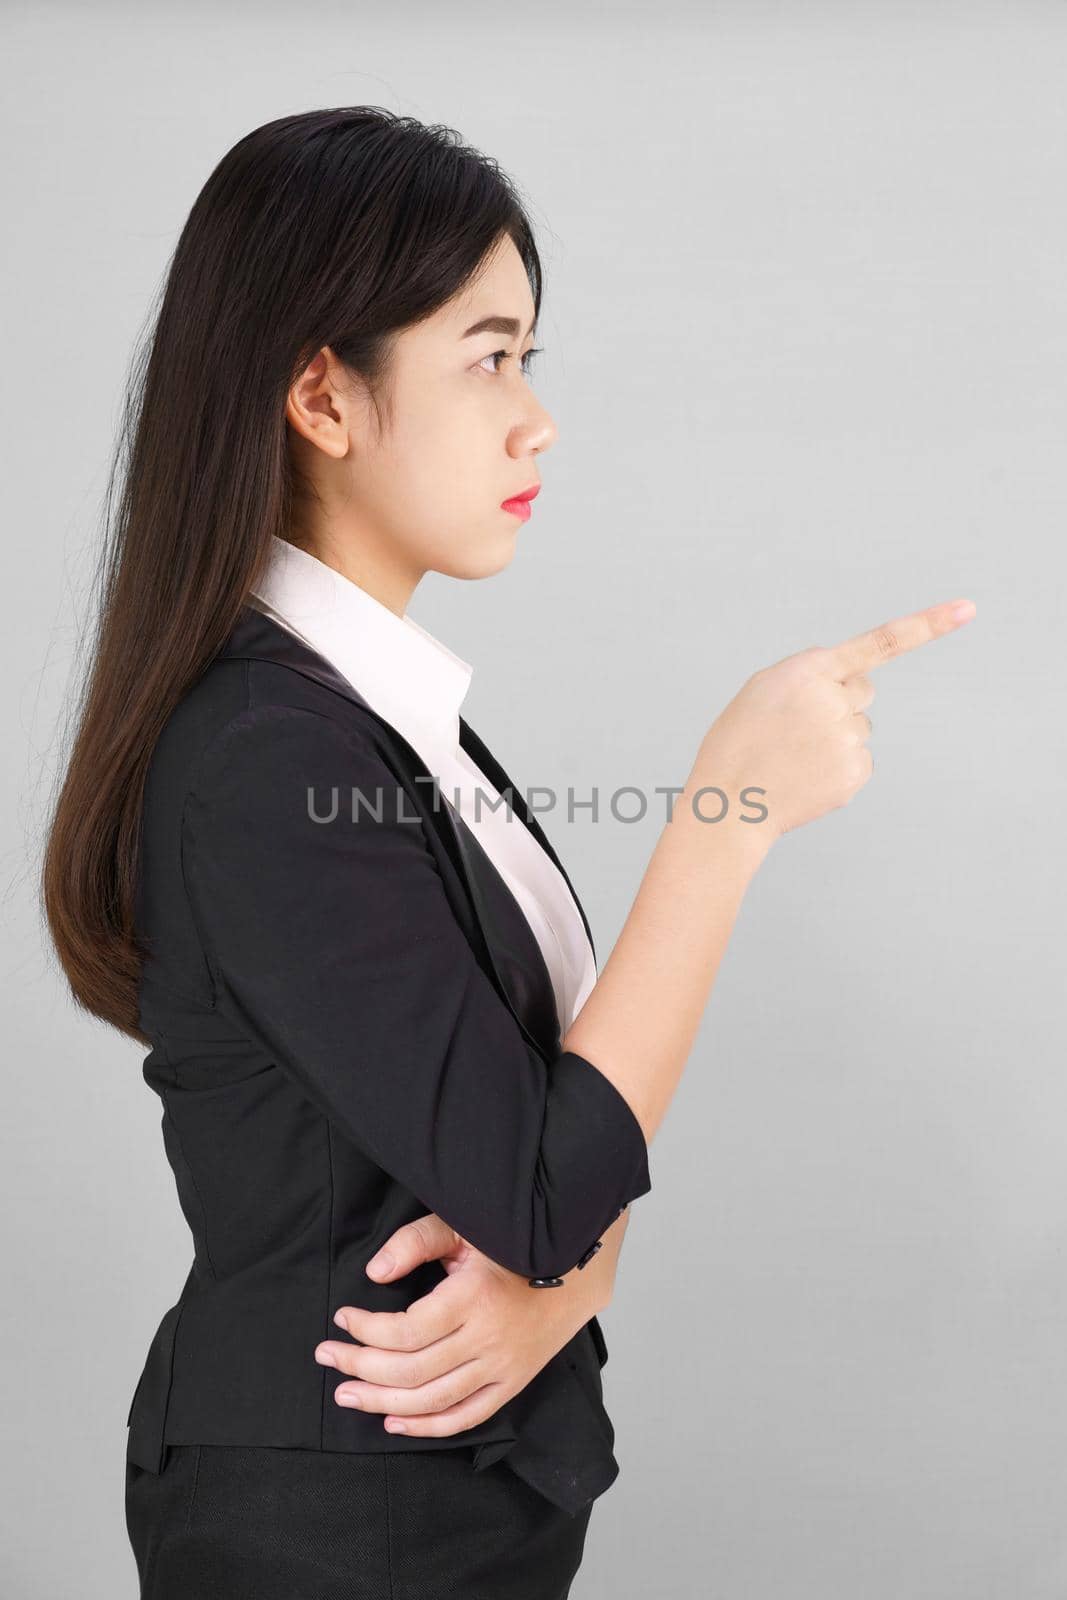 Asian woman in suit looking at camera and pointing finger on gray background